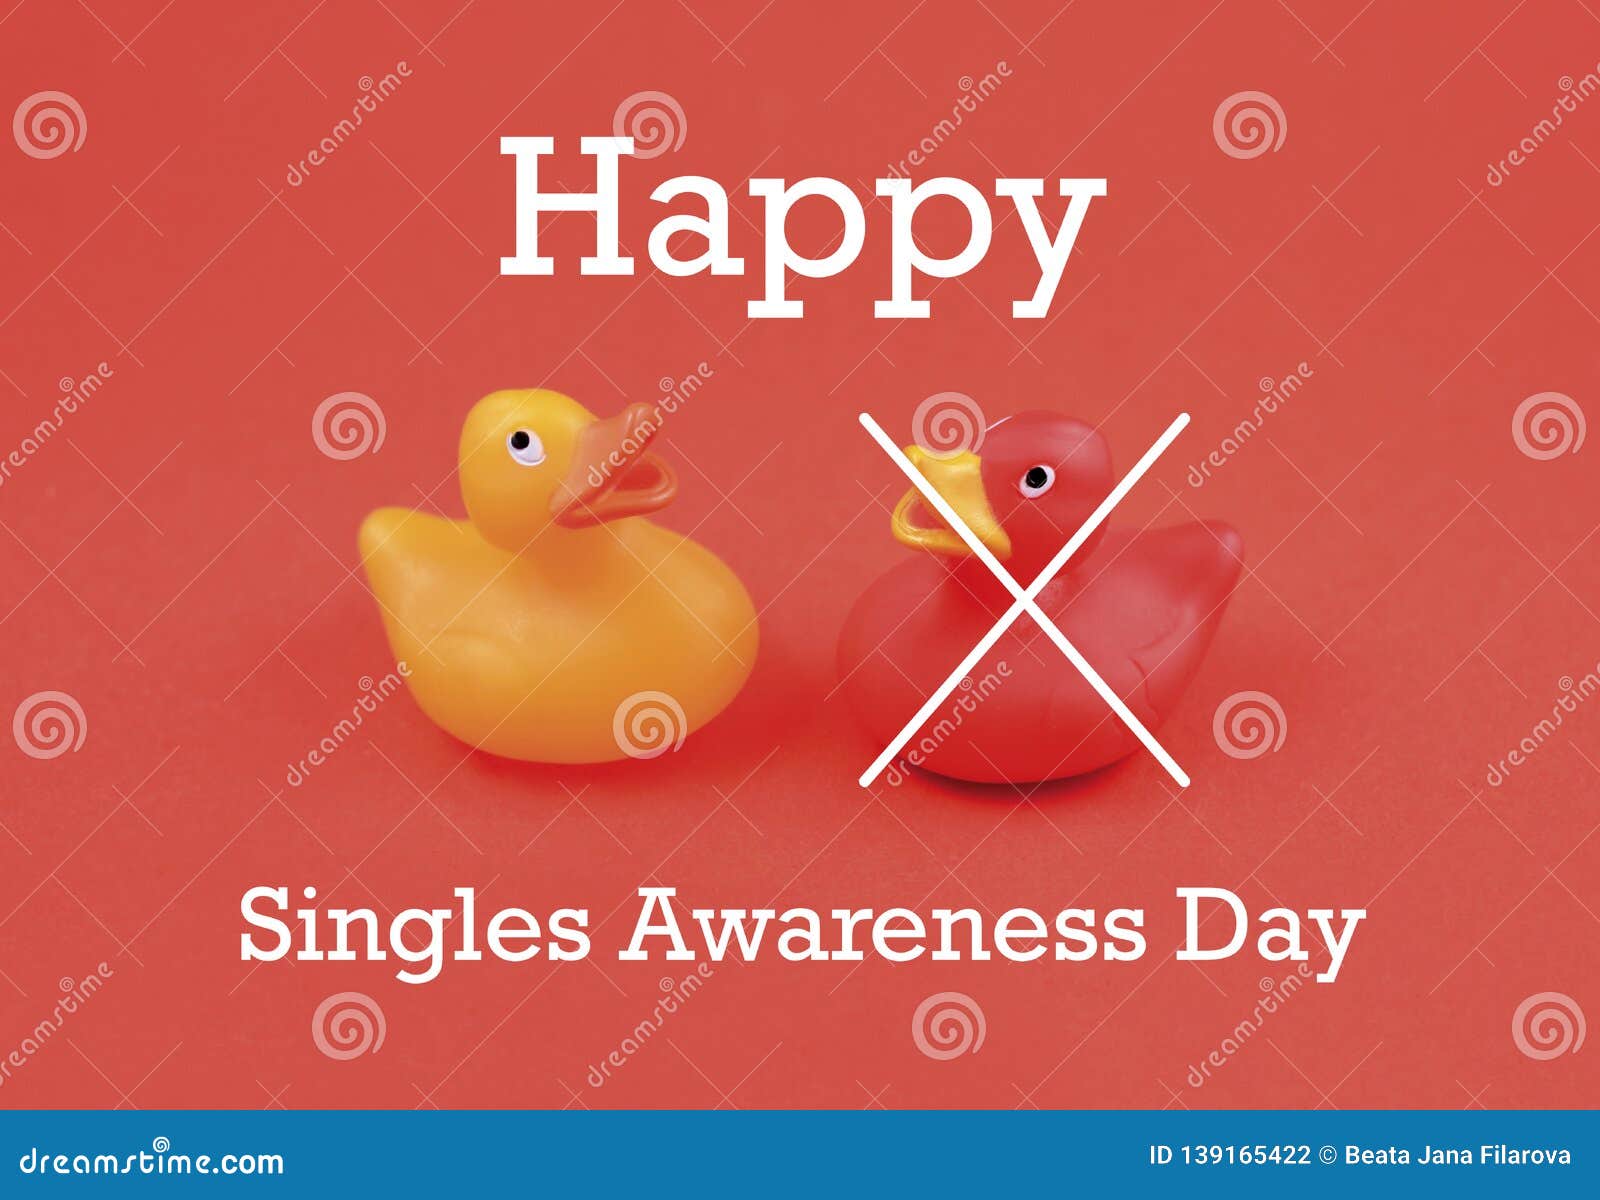 singles awareness day images